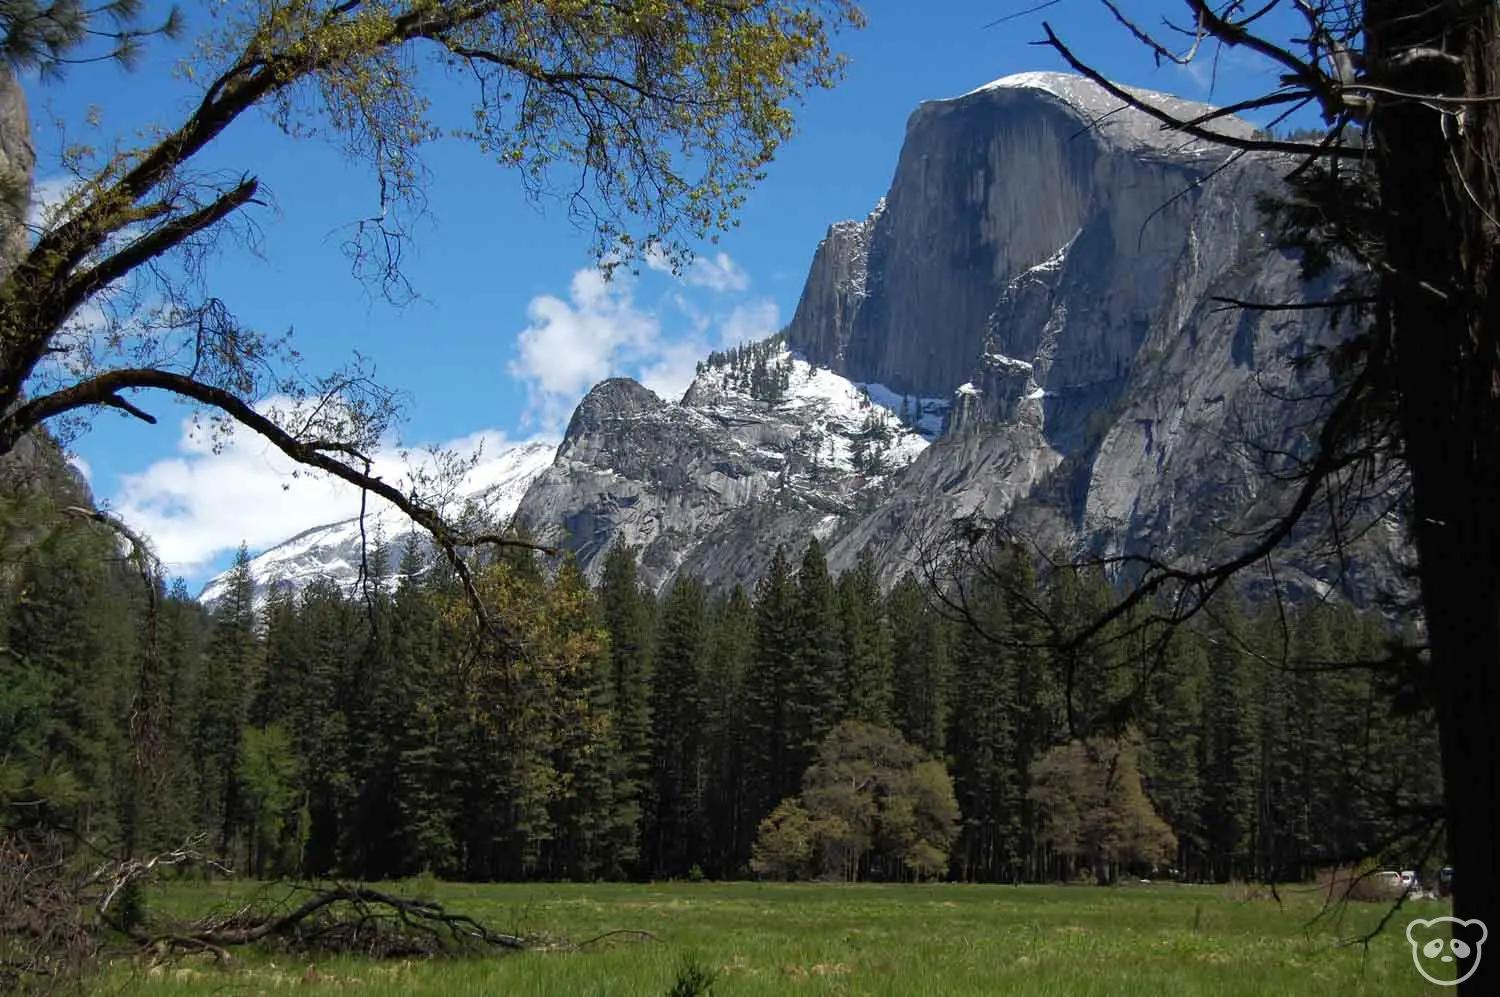 View of granite mountain in the background with tree forest and grass meadow in the foreground.